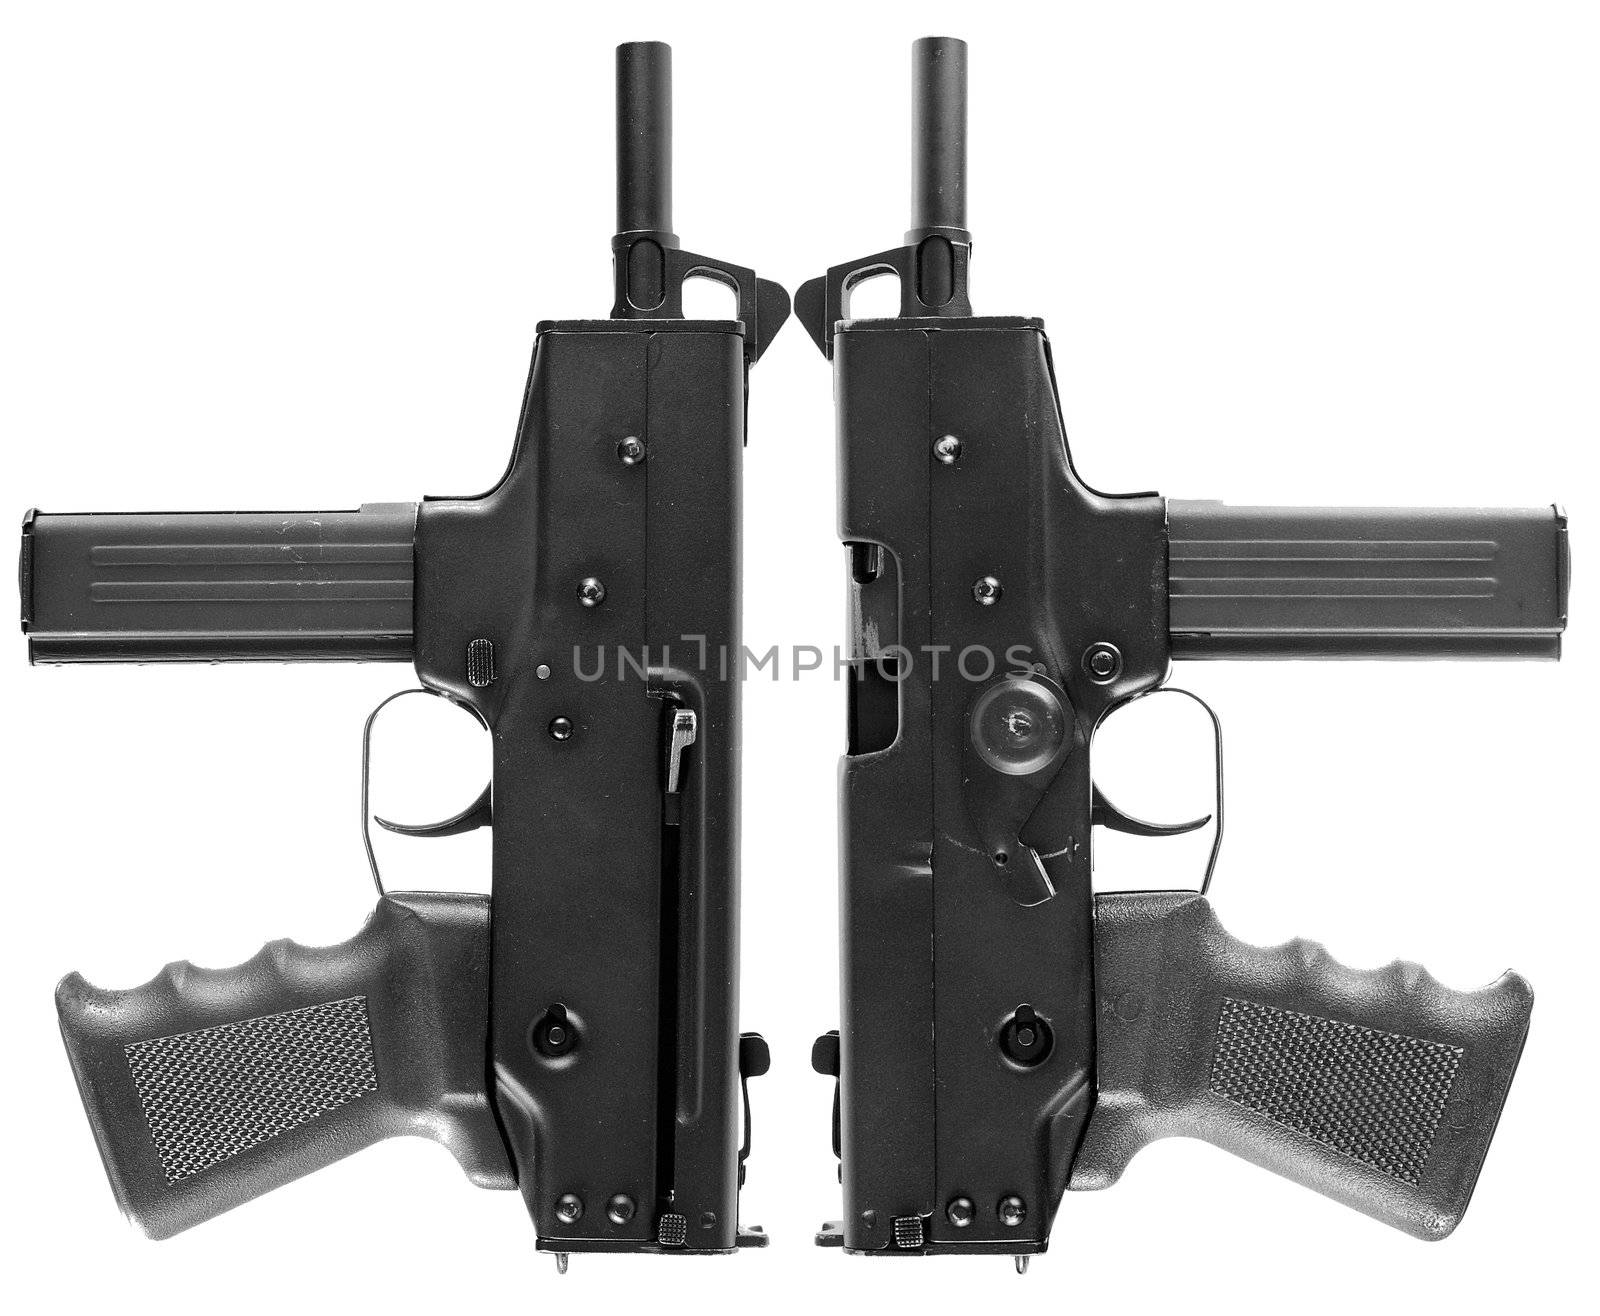 Two automatic pistols on a white background